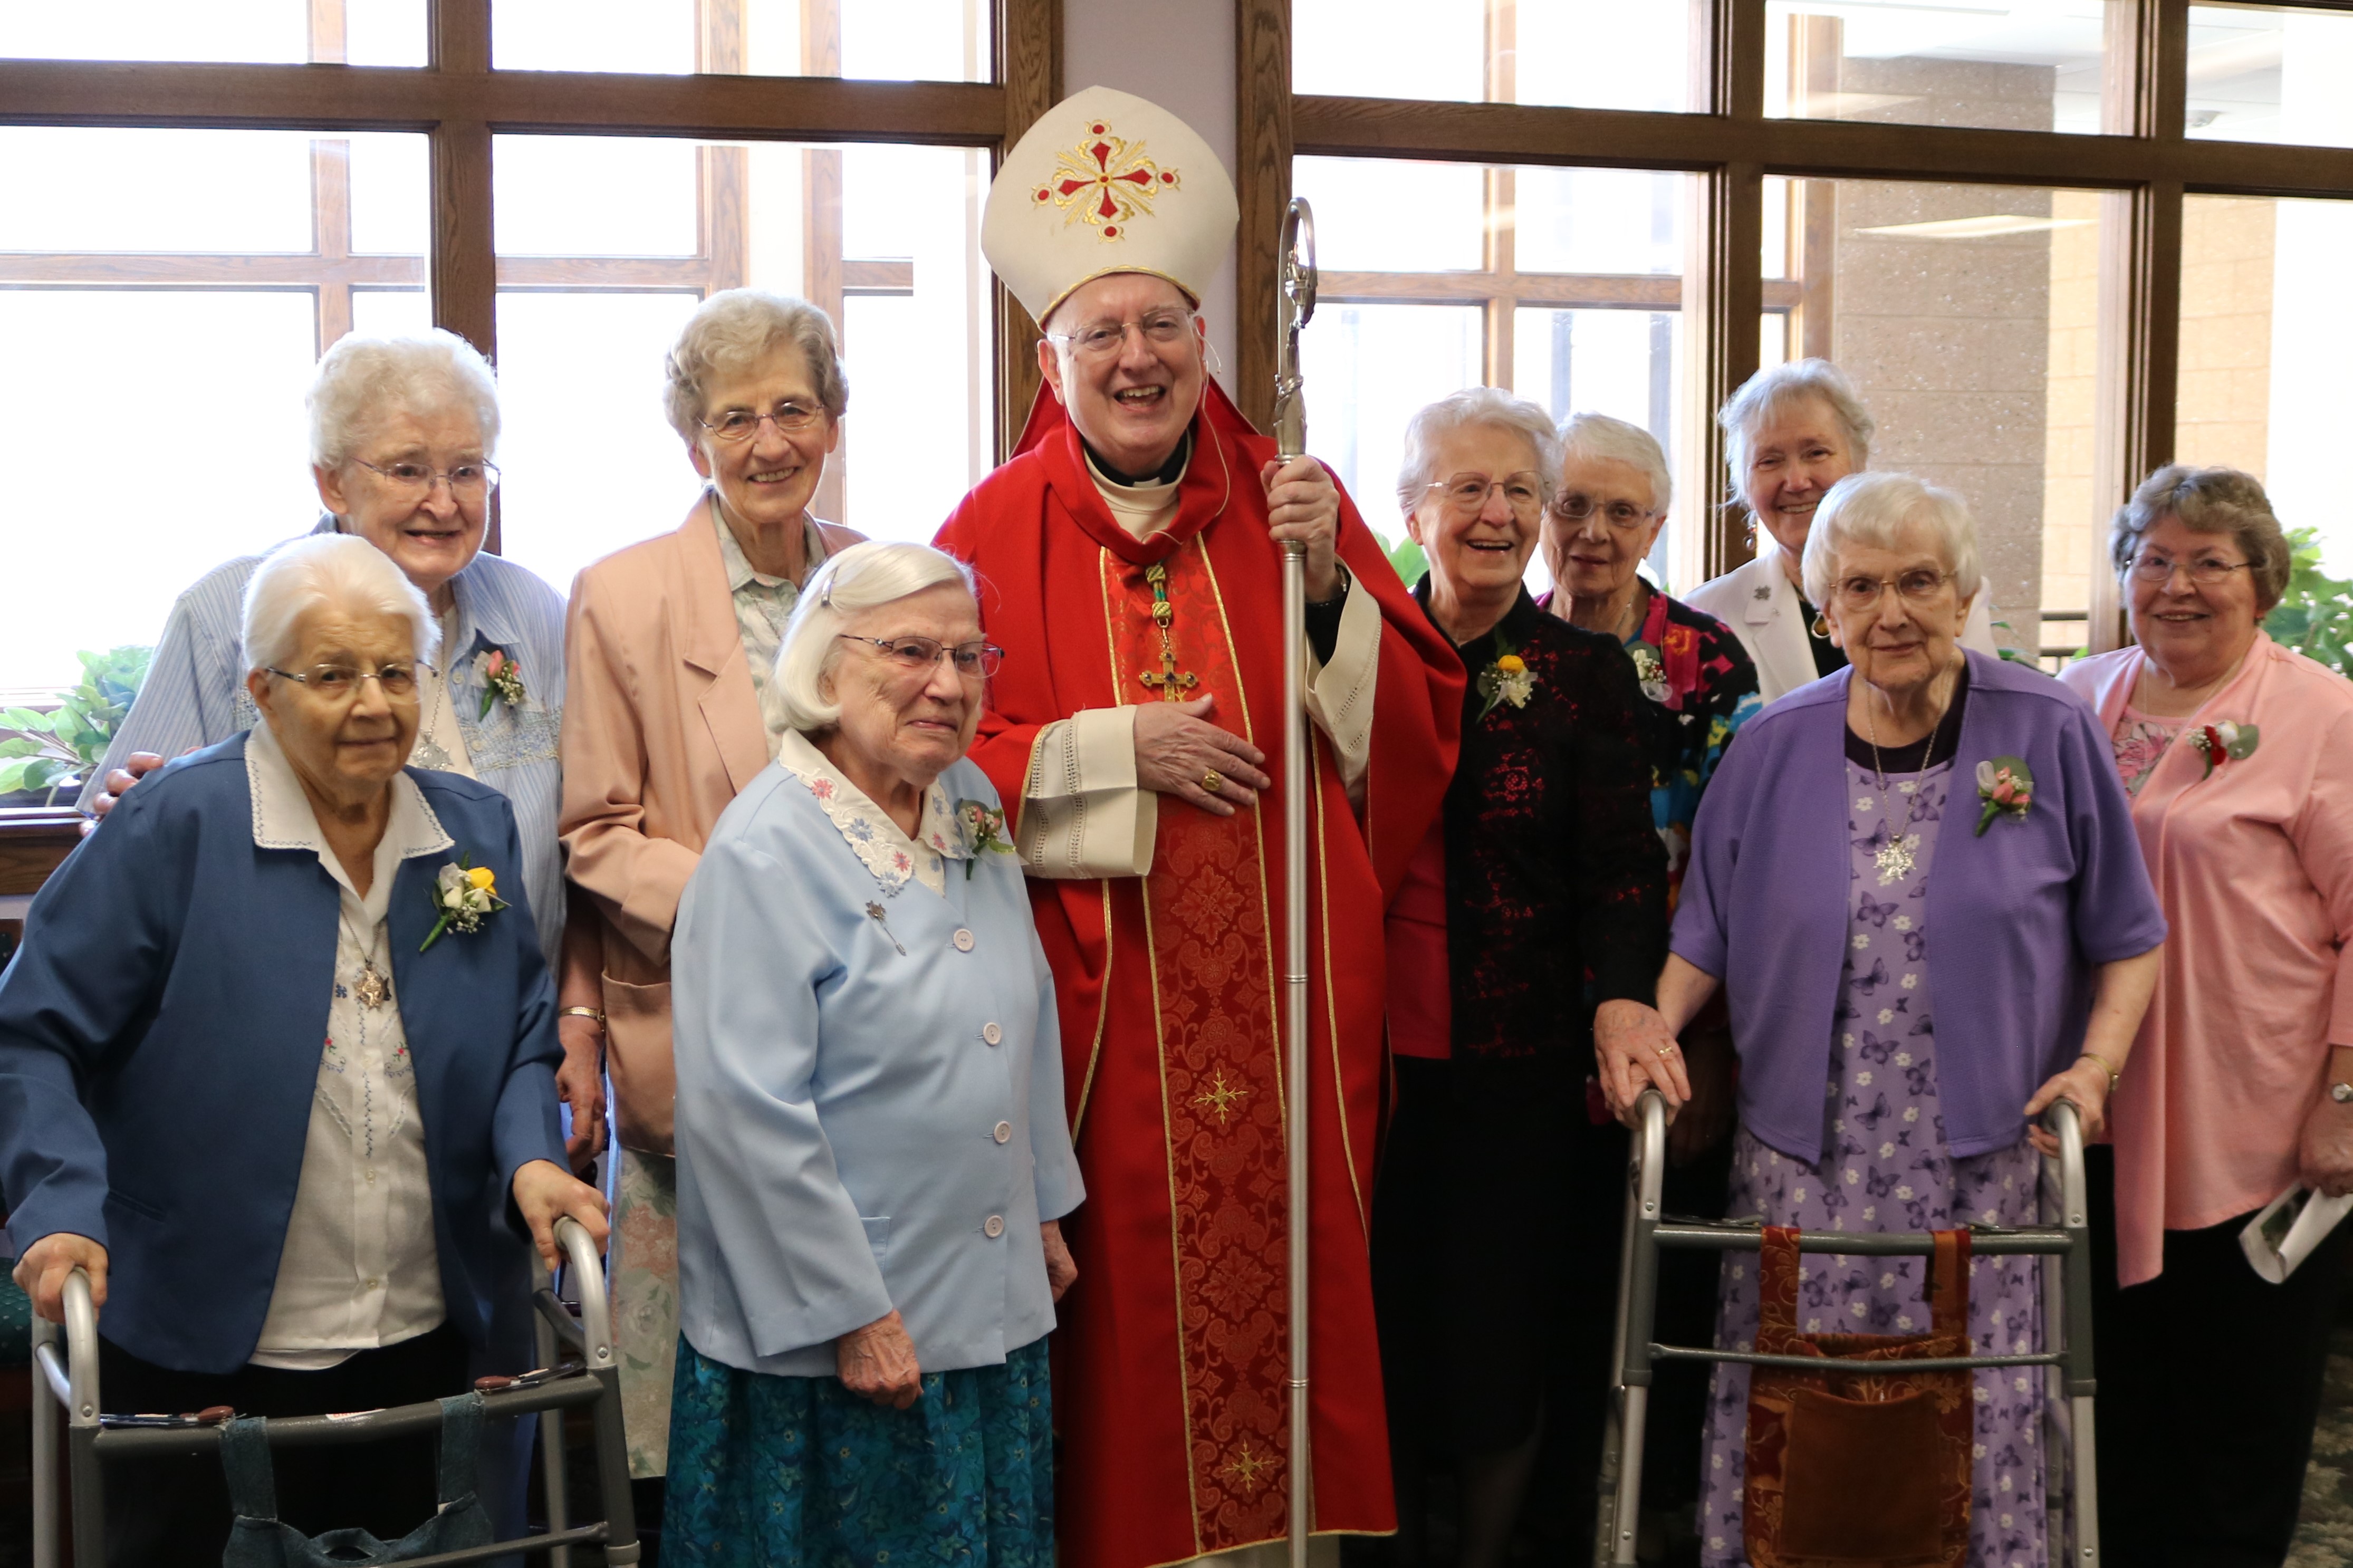 FSPA 2023 diamond jubilee celebration with sisters and Bishop William P. Callahan